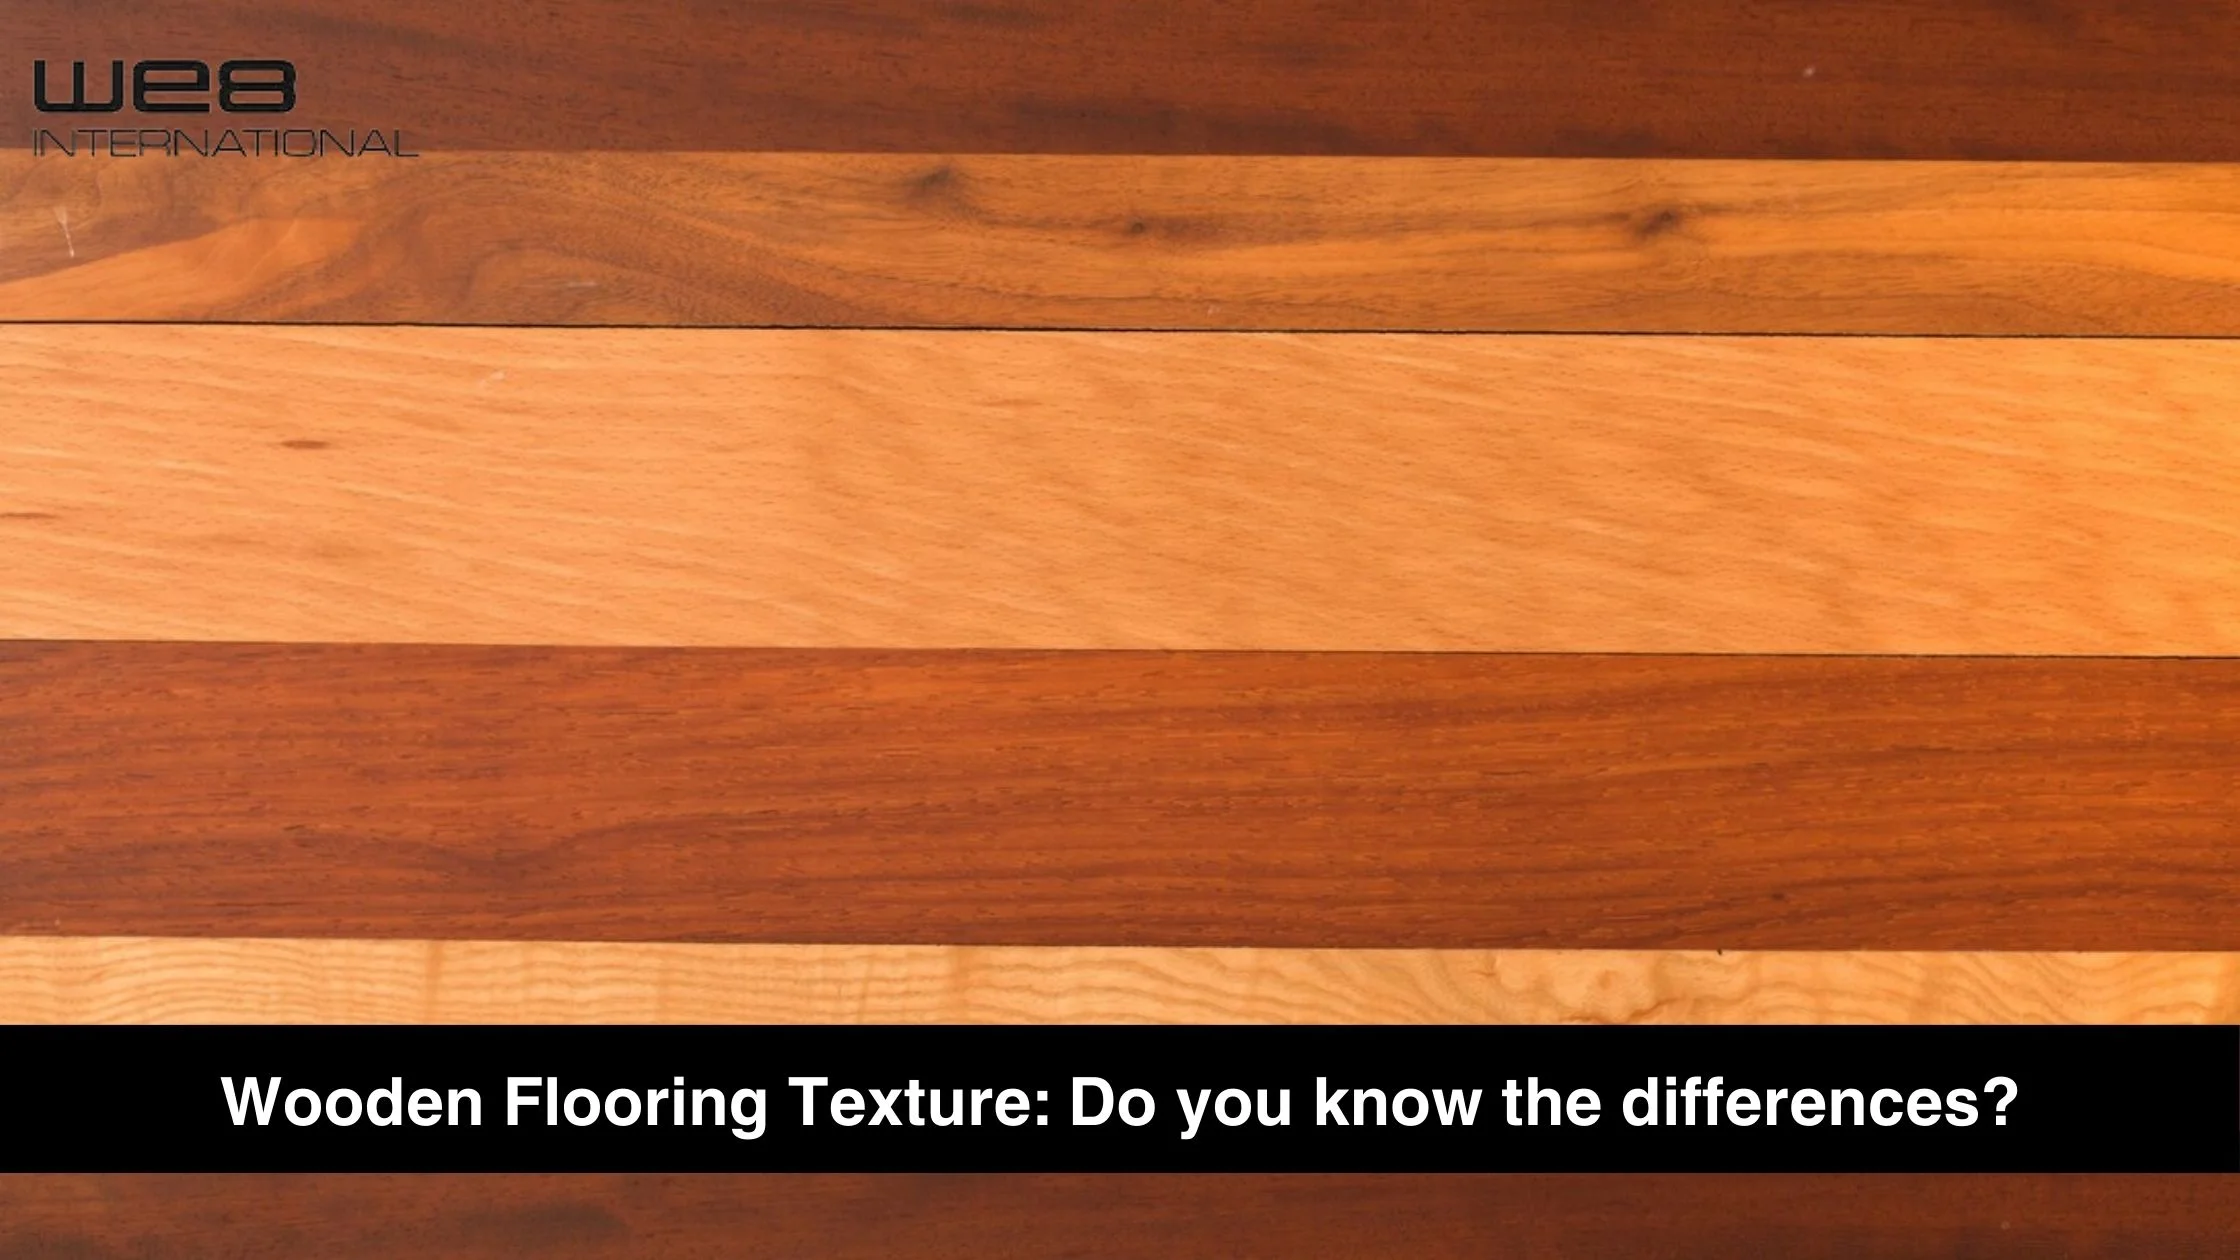 Wooden Flooring Texture: Do you know the differences?